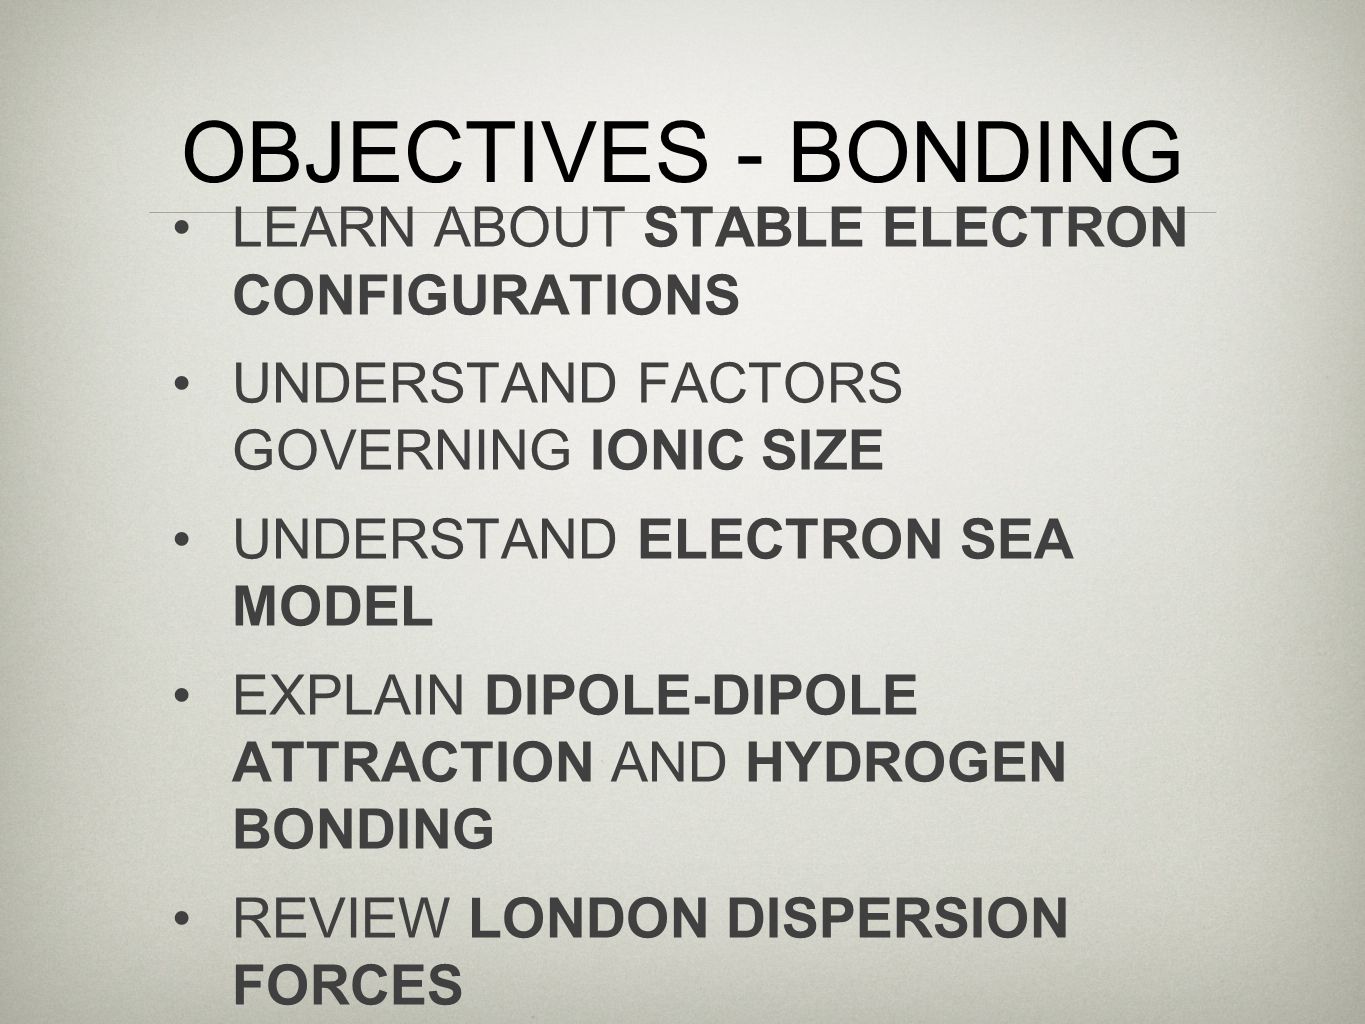 OBJECTIVES - BONDING LEARN ABOUT STABLE ELECTRON CONFIGURATIONS UNDERSTAND FACTORS GOVERNING IONIC SIZE UNDERSTAND ELECTRON SEA MODEL EXPLAIN DIPOLE-DIPOLE ATTRACTION AND HYDROGEN BONDING REVIEW LONDON DISPERSION FORCES